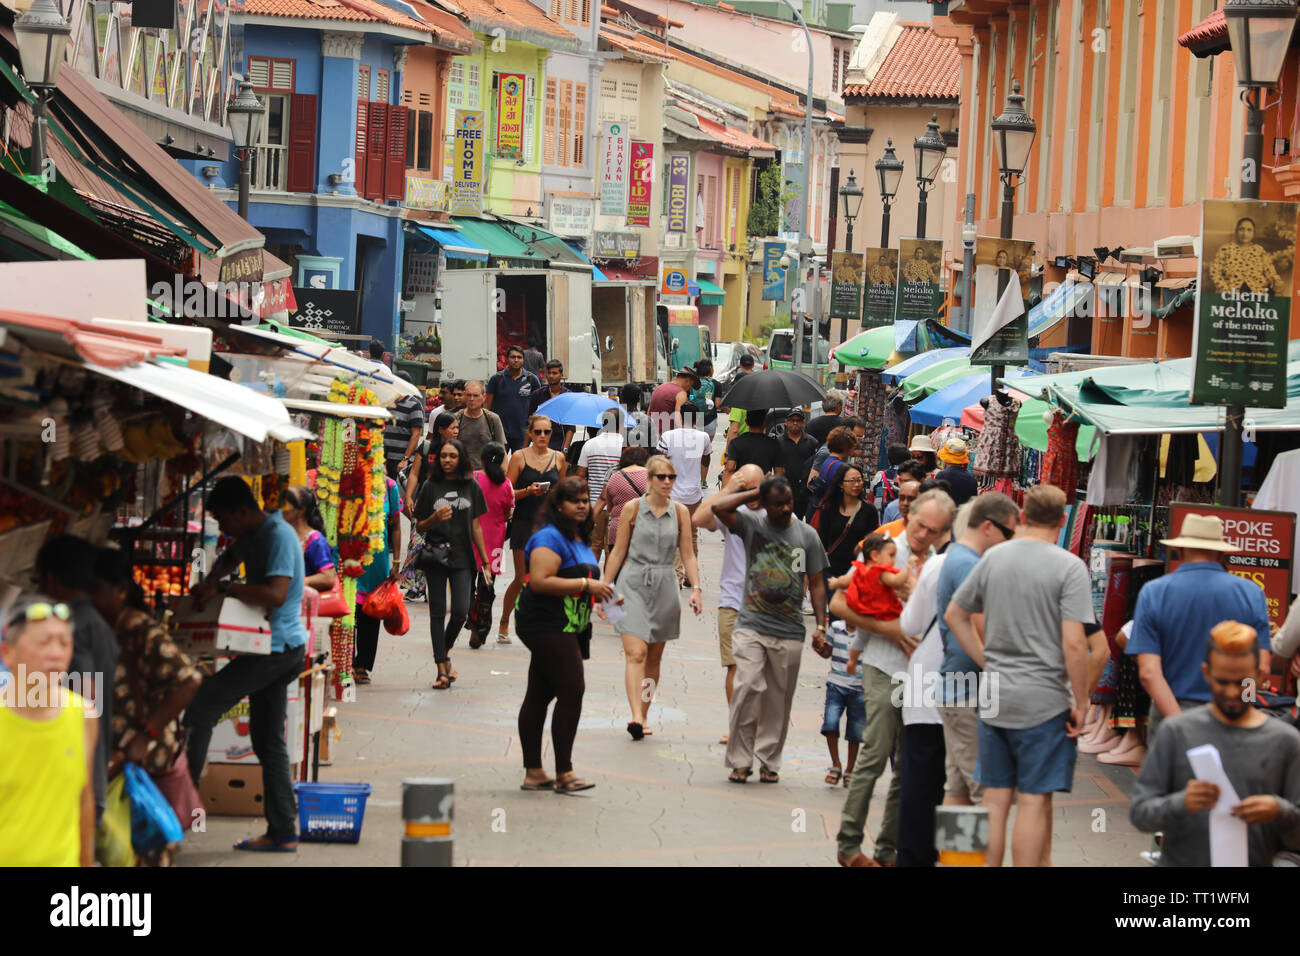 Busy popular shopping street with small shops in the Indian ethnic district of Little India or Tekka of the city state of Singapore. Stock Photo